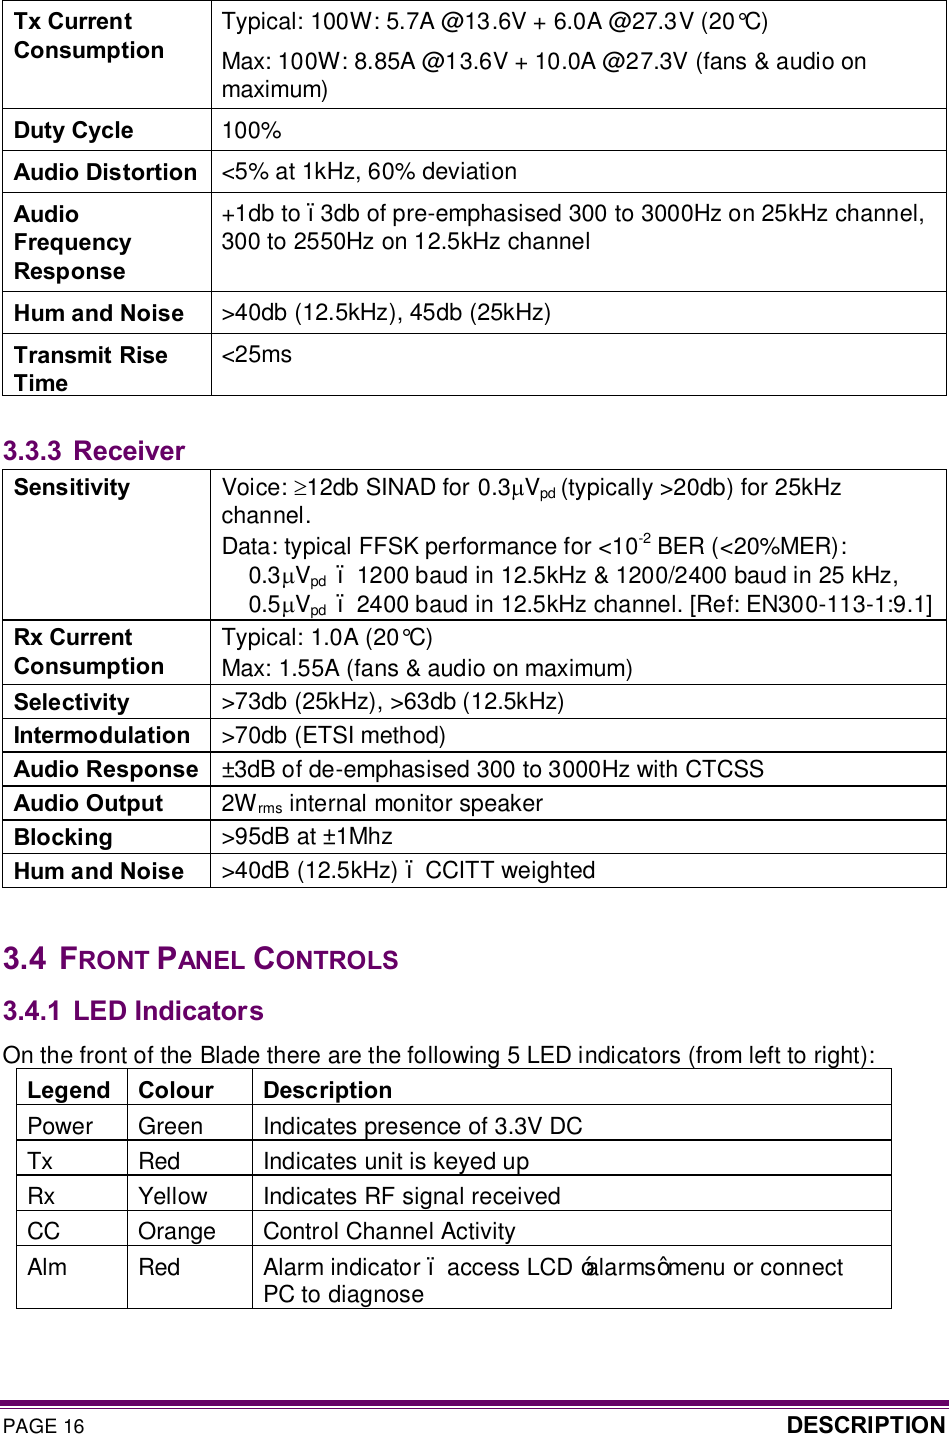 PAGE 16  DESCRIPTION  Tx Current Consumption Typical: 100W: 5.7A @13.6V + 6.0A @27.3V (20°C) Max: 100W: 8.85A @13.6V + 10.0A @27.3V (fans &amp; audio on maximum) Duty Cycle  100% Audio Distortion  &lt;5% at 1kHz, 60% deviation Audio Frequency Response +1db to –3db of pre-emphasised 300 to 3000Hz on 25kHz channel, 300 to 2550Hz on 12.5kHz channel Hum and Noise  &gt;40db (12.5kHz), 45db (25kHz) Transmit Rise Time &lt;25ms  3.3.3 Receiver Sensitivity  Voice: ³12db SINAD for 0.3mVpd (typically &gt;20db) for 25kHz channel. Data: typical FFSK performance for &lt;10-2 BER (&lt;20%MER): 0.3mVpd  – 1200 baud in 12.5kHz &amp; 1200/2400 baud in 25 kHz,  0.5mVpd  – 2400 baud in 12.5kHz channel. [Ref: EN300-113-1:9.1] Rx Current Consumption Typical: 1.0A (20°C) Max: 1.55A (fans &amp; audio on maximum) Selectivity  &gt;73db (25kHz), &gt;63db (12.5kHz) Intermodulation  &gt;70db (ETSI method) Audio Response  ±3dB of de-emphasised 300 to 3000Hz with CTCSS Audio Output  2Wrms internal monitor speaker Blocking  &gt;95dB at ±1Mhz Hum and Noise  &gt;40dB (12.5kHz) – CCITT weighted  3.4  FRONT PANEL CONTROLS 3.4.1 LED Indicators On the front of the Blade there are the following 5 LED indicators (from left to right): Legend  Colour  Description Power   Green  Indicates presence of 3.3V DC Tx  Red  Indicates unit is keyed up Rx  Yellow  Indicates RF signal received CC  Orange  Control Channel Activity Alm  Red  Alarm indicator – access LCD ‘alarms’ menu or connect PC to diagnose  